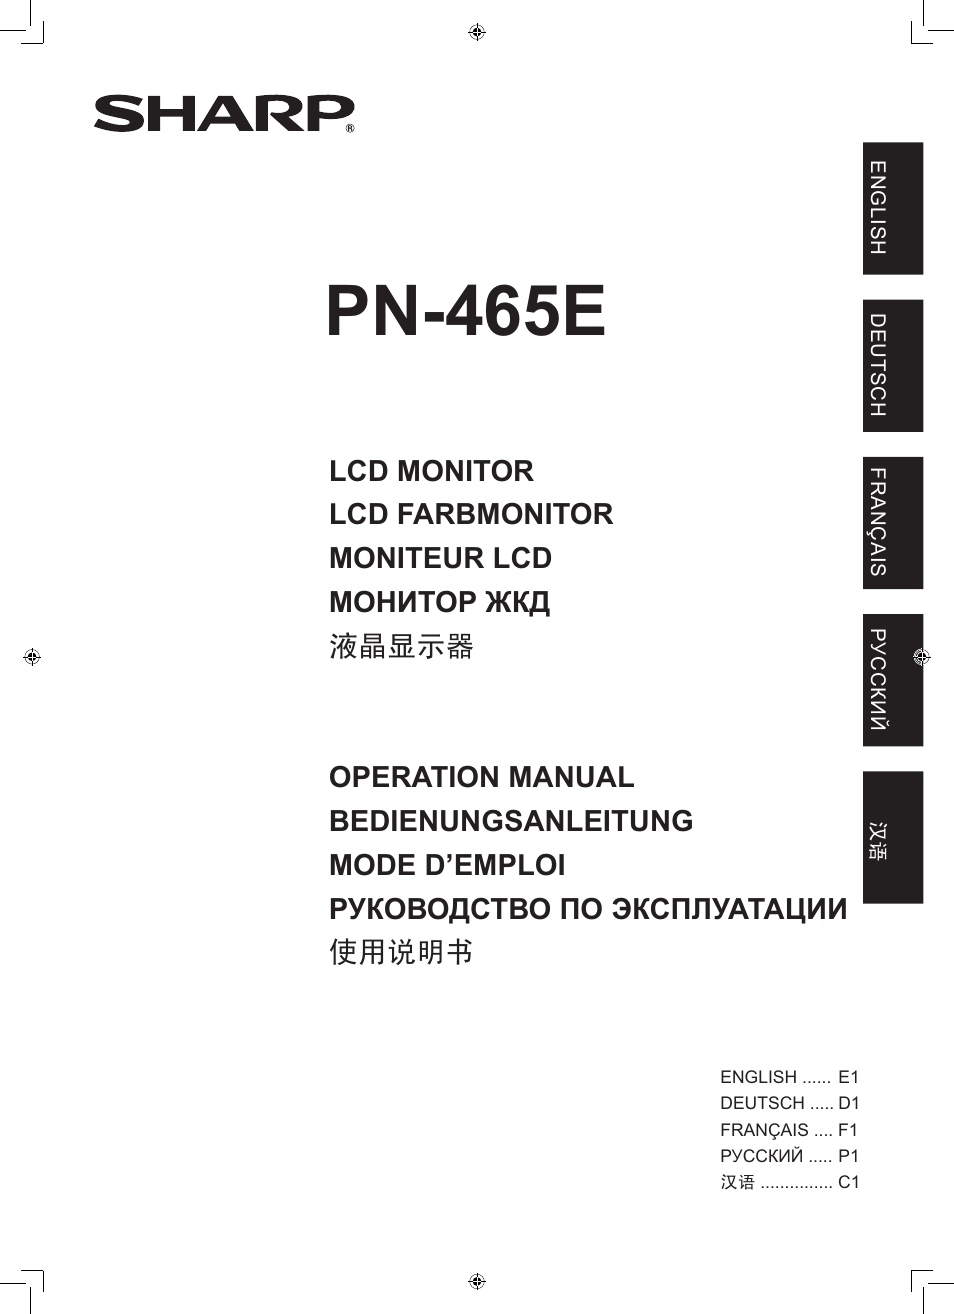 Sharp PN-465E User Manual | 38 pages